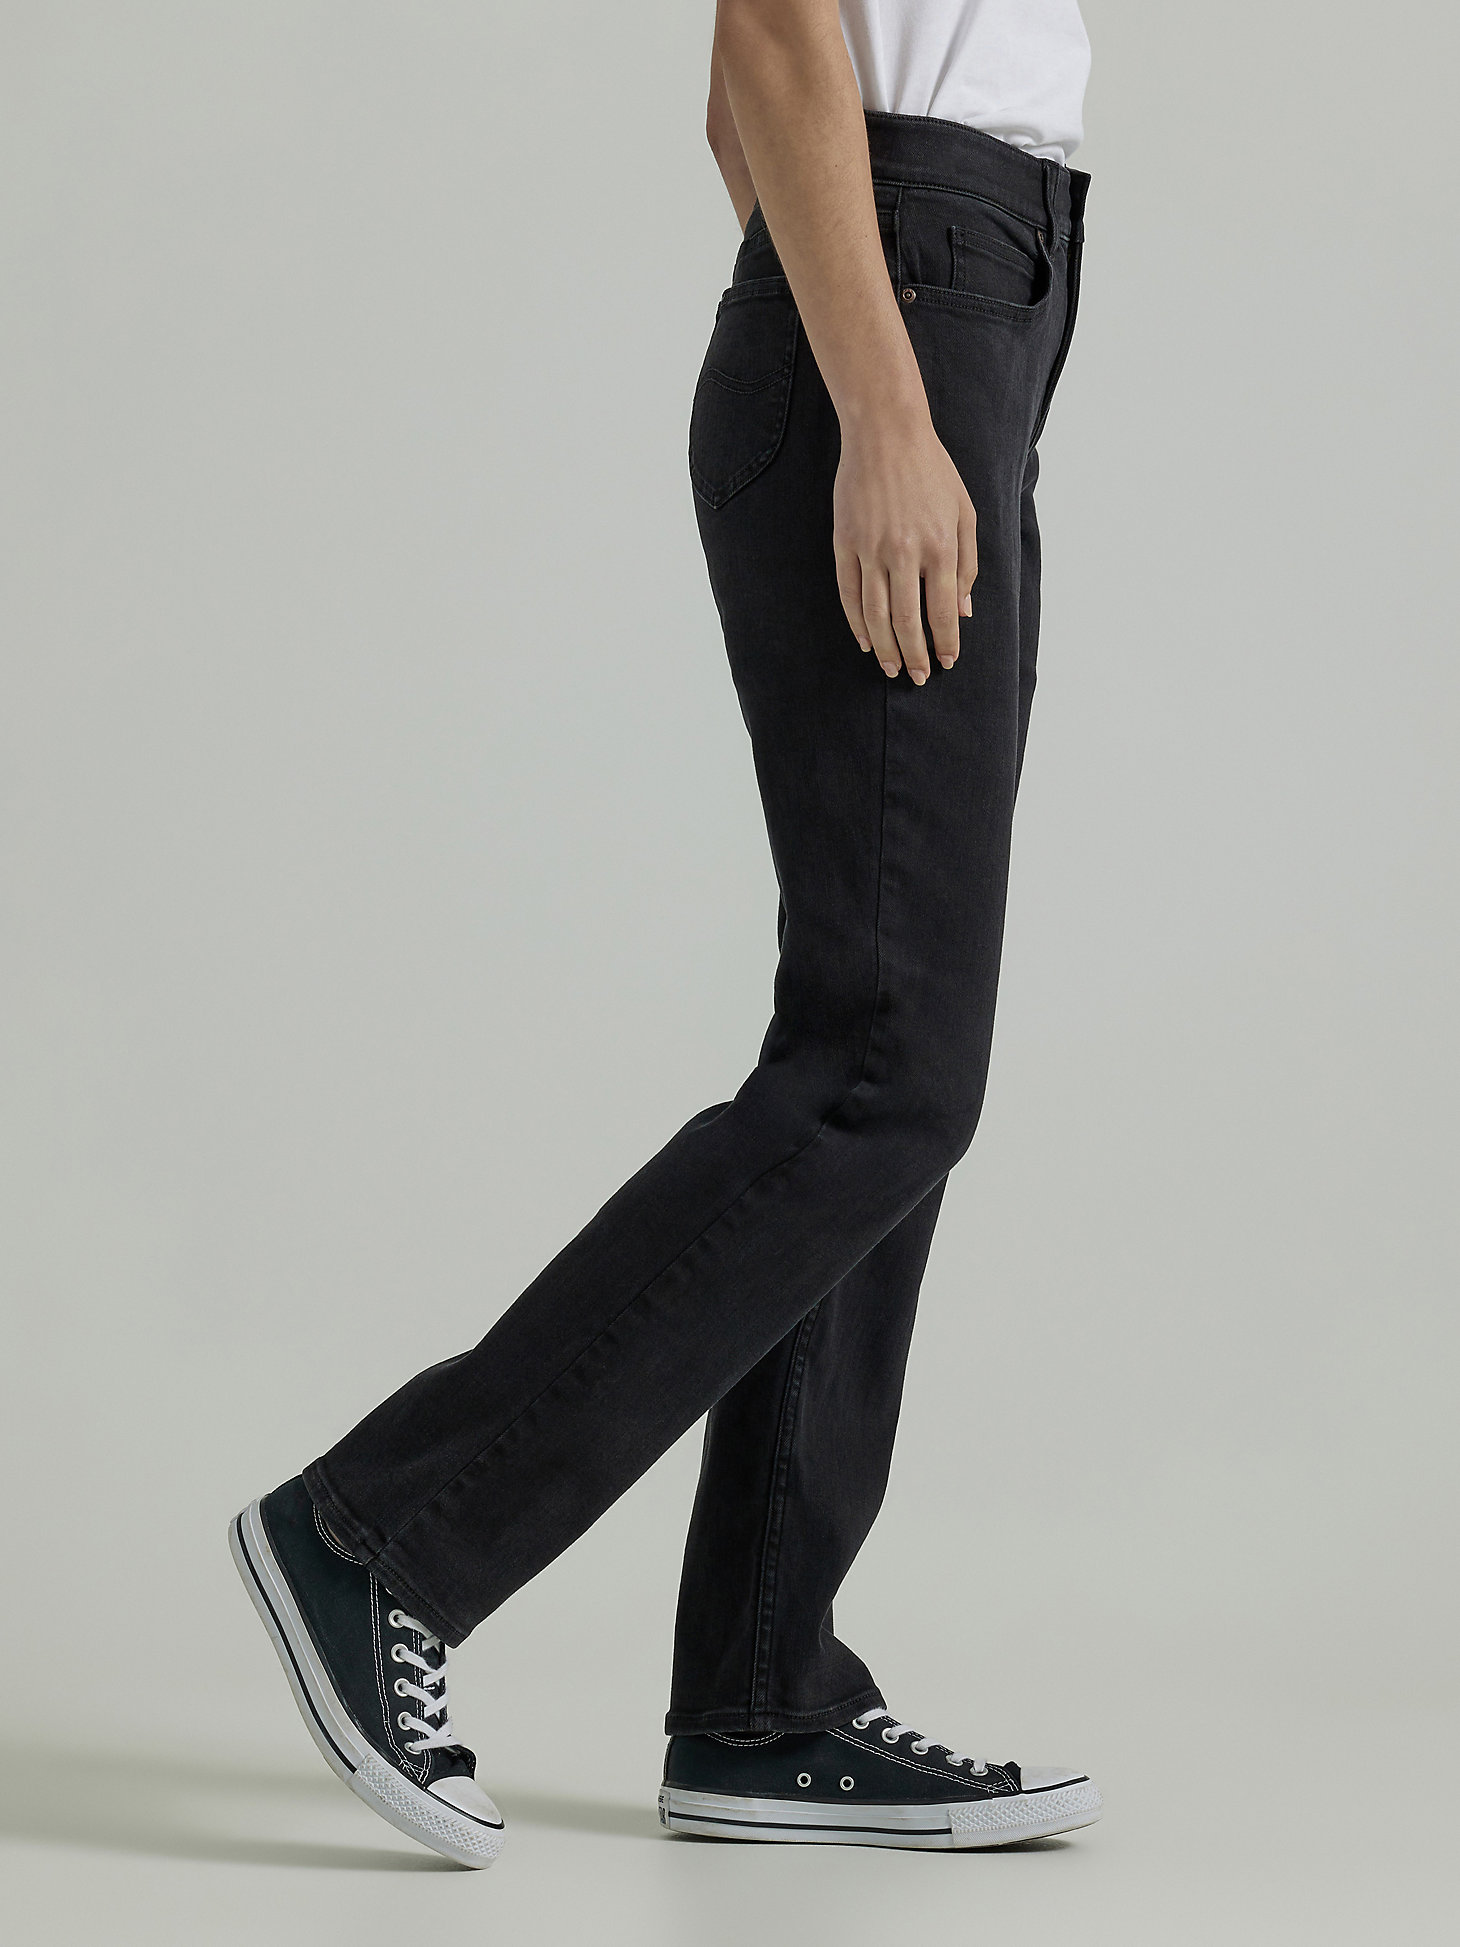 Women's Ultra Lux Comfort with Flex Motion Straight Jean (Petite) in Midnight Bloom alternative view 3